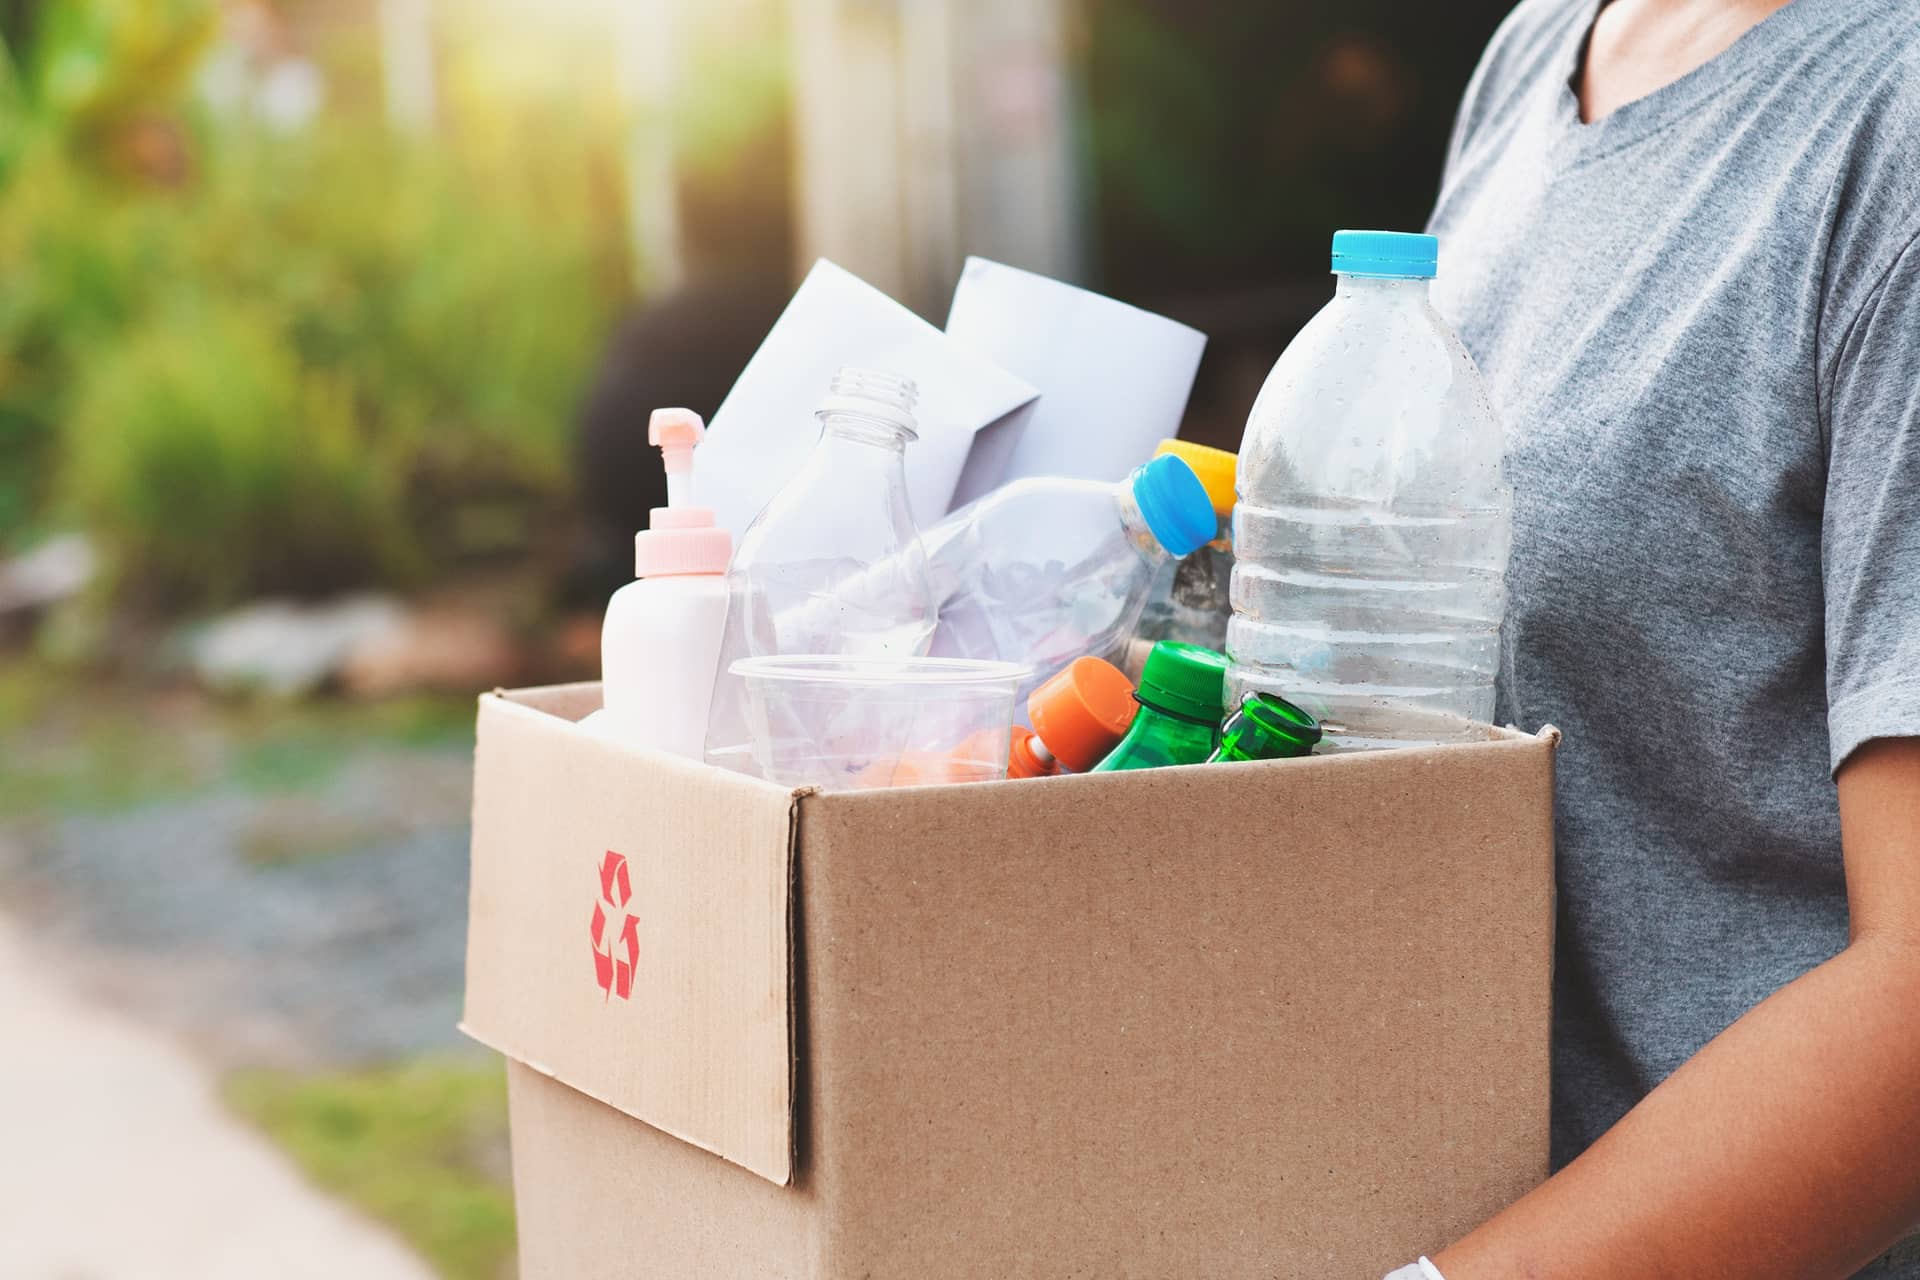 8 out of every 10 Americans affirm that recycling is worthwhile! However, more than half of household recyclables are disposed of in trash bins rather than recycling bins, leading to economic and environmental repercussions.